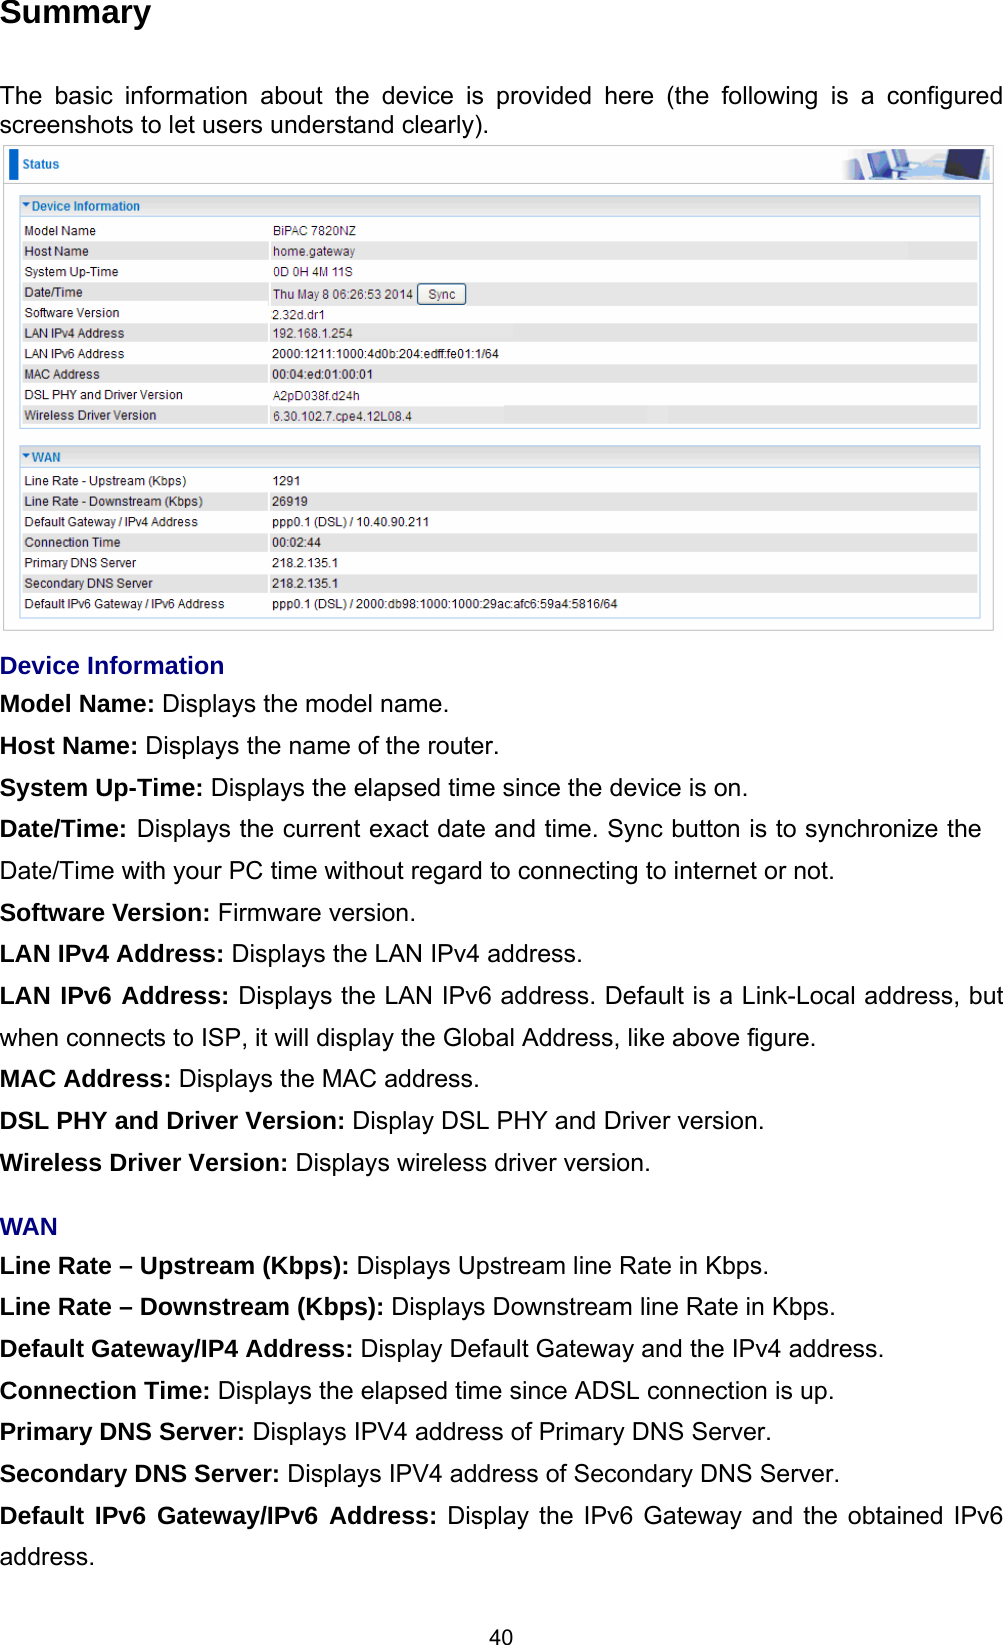  40 Summary  The basic information about the device is provided here (the following is a configured screenshots to let users understand clearly).   Device Information Model Name: Displays the model name. Host Name: Displays the name of the router. System Up-Time: Displays the elapsed time since the device is on. Date/Time: Displays the current exact date and time. Sync button is to synchronize the Date/Time with your PC time without regard to connecting to internet or not. Software Version: Firmware version.  LAN IPv4 Address: Displays the LAN IPv4 address. LAN IPv6 Address: Displays the LAN IPv6 address. Default is a Link-Local address, but when connects to ISP, it will display the Global Address, like above figure. MAC Address: Displays the MAC address. DSL PHY and Driver Version: Display DSL PHY and Driver version. Wireless Driver Version: Displays wireless driver version.   WAN Line Rate – Upstream (Kbps): Displays Upstream line Rate in Kbps. Line Rate – Downstream (Kbps): Displays Downstream line Rate in Kbps. Default Gateway/IP4 Address: Display Default Gateway and the IPv4 address. Connection Time: Displays the elapsed time since ADSL connection is up. Primary DNS Server: Displays IPV4 address of Primary DNS Server. Secondary DNS Server: Displays IPV4 address of Secondary DNS Server. Default IPv6 Gateway/IPv6 Address: Display the IPv6 Gateway and the obtained IPv6 address. 